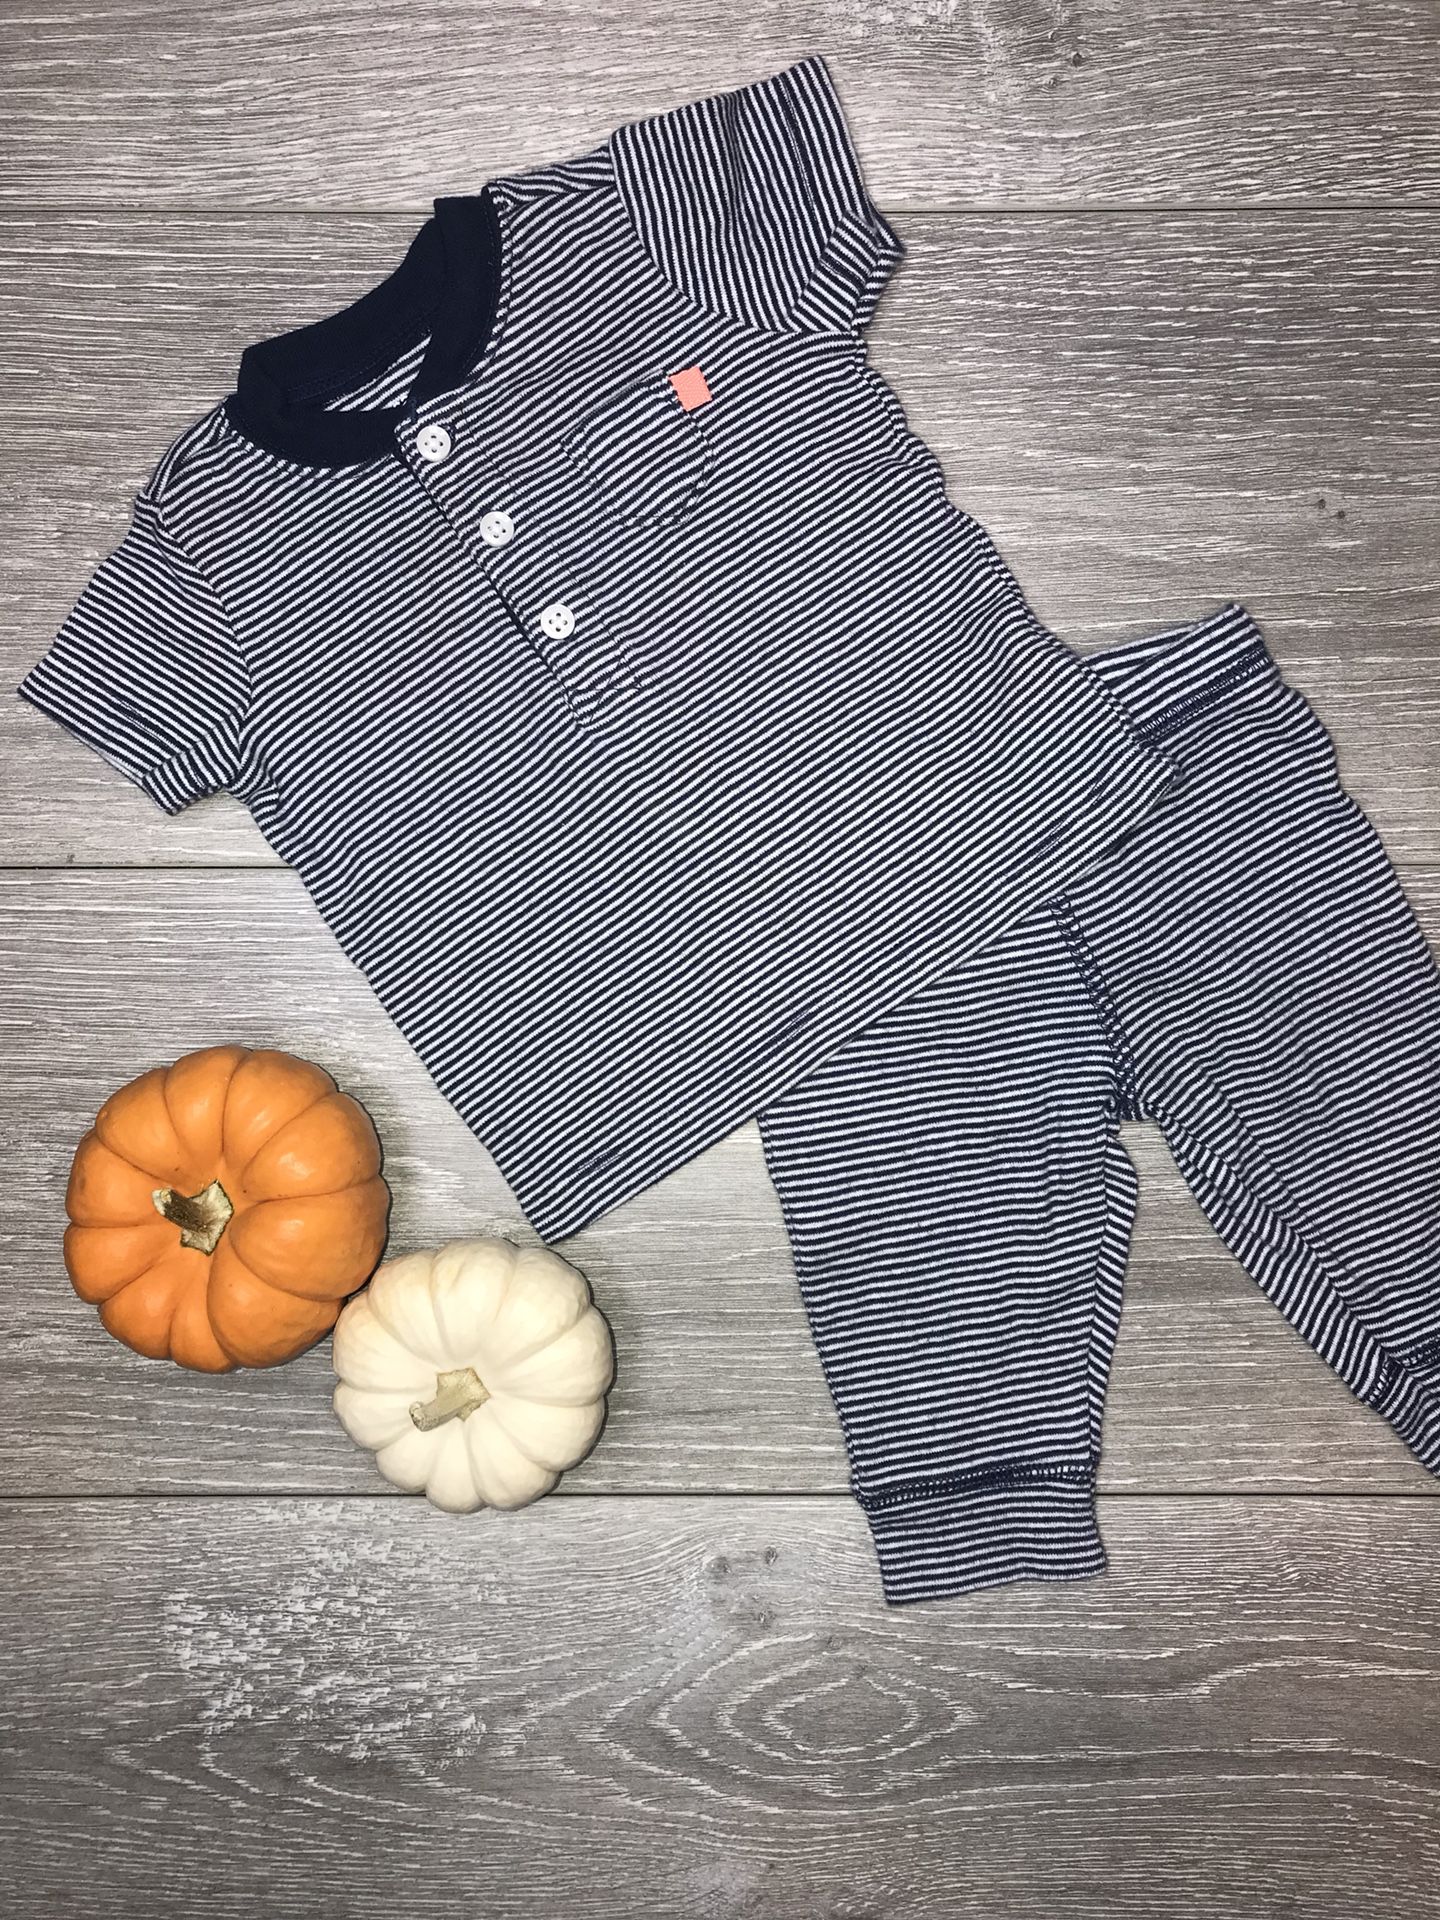 Baby Boy Clothing Carter’s 3 Months $3